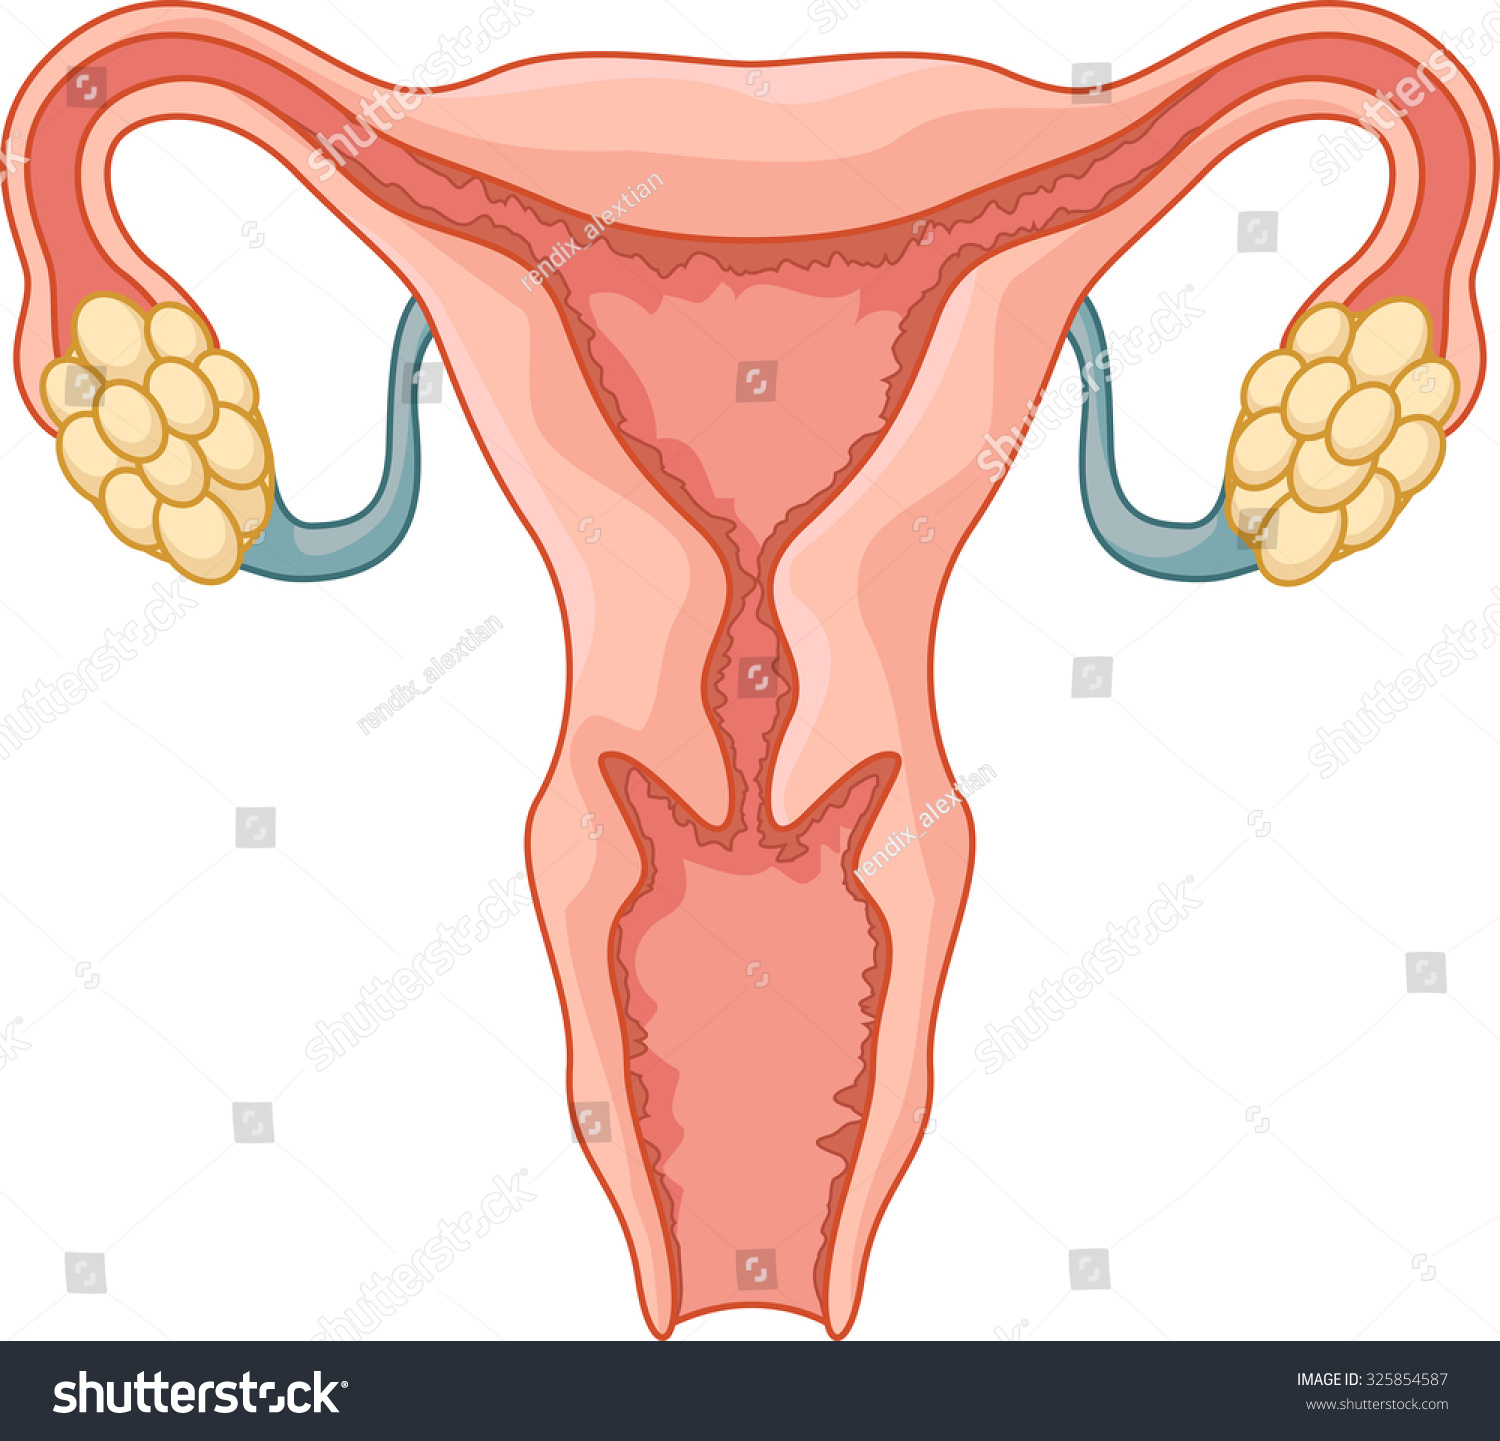 Female Reproductive System Illustration Stock Vector Royalty Free 2808